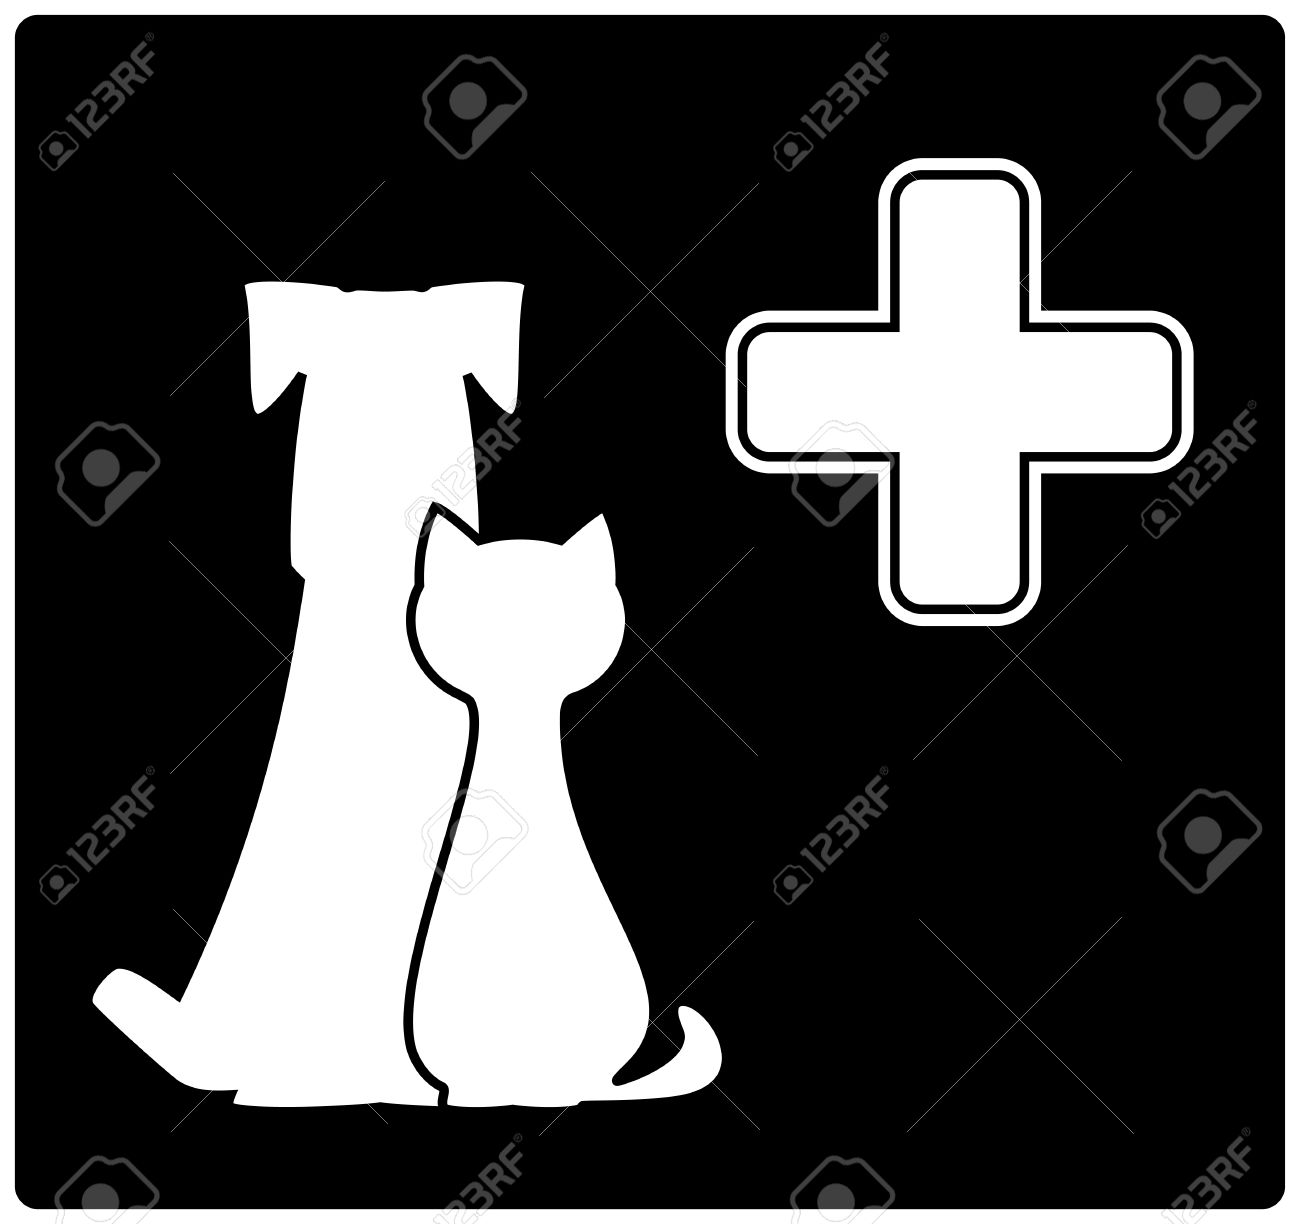 24665558-veterinary-icon-with-medical-cross-dog-and-cat-Stock-Photo.jpg